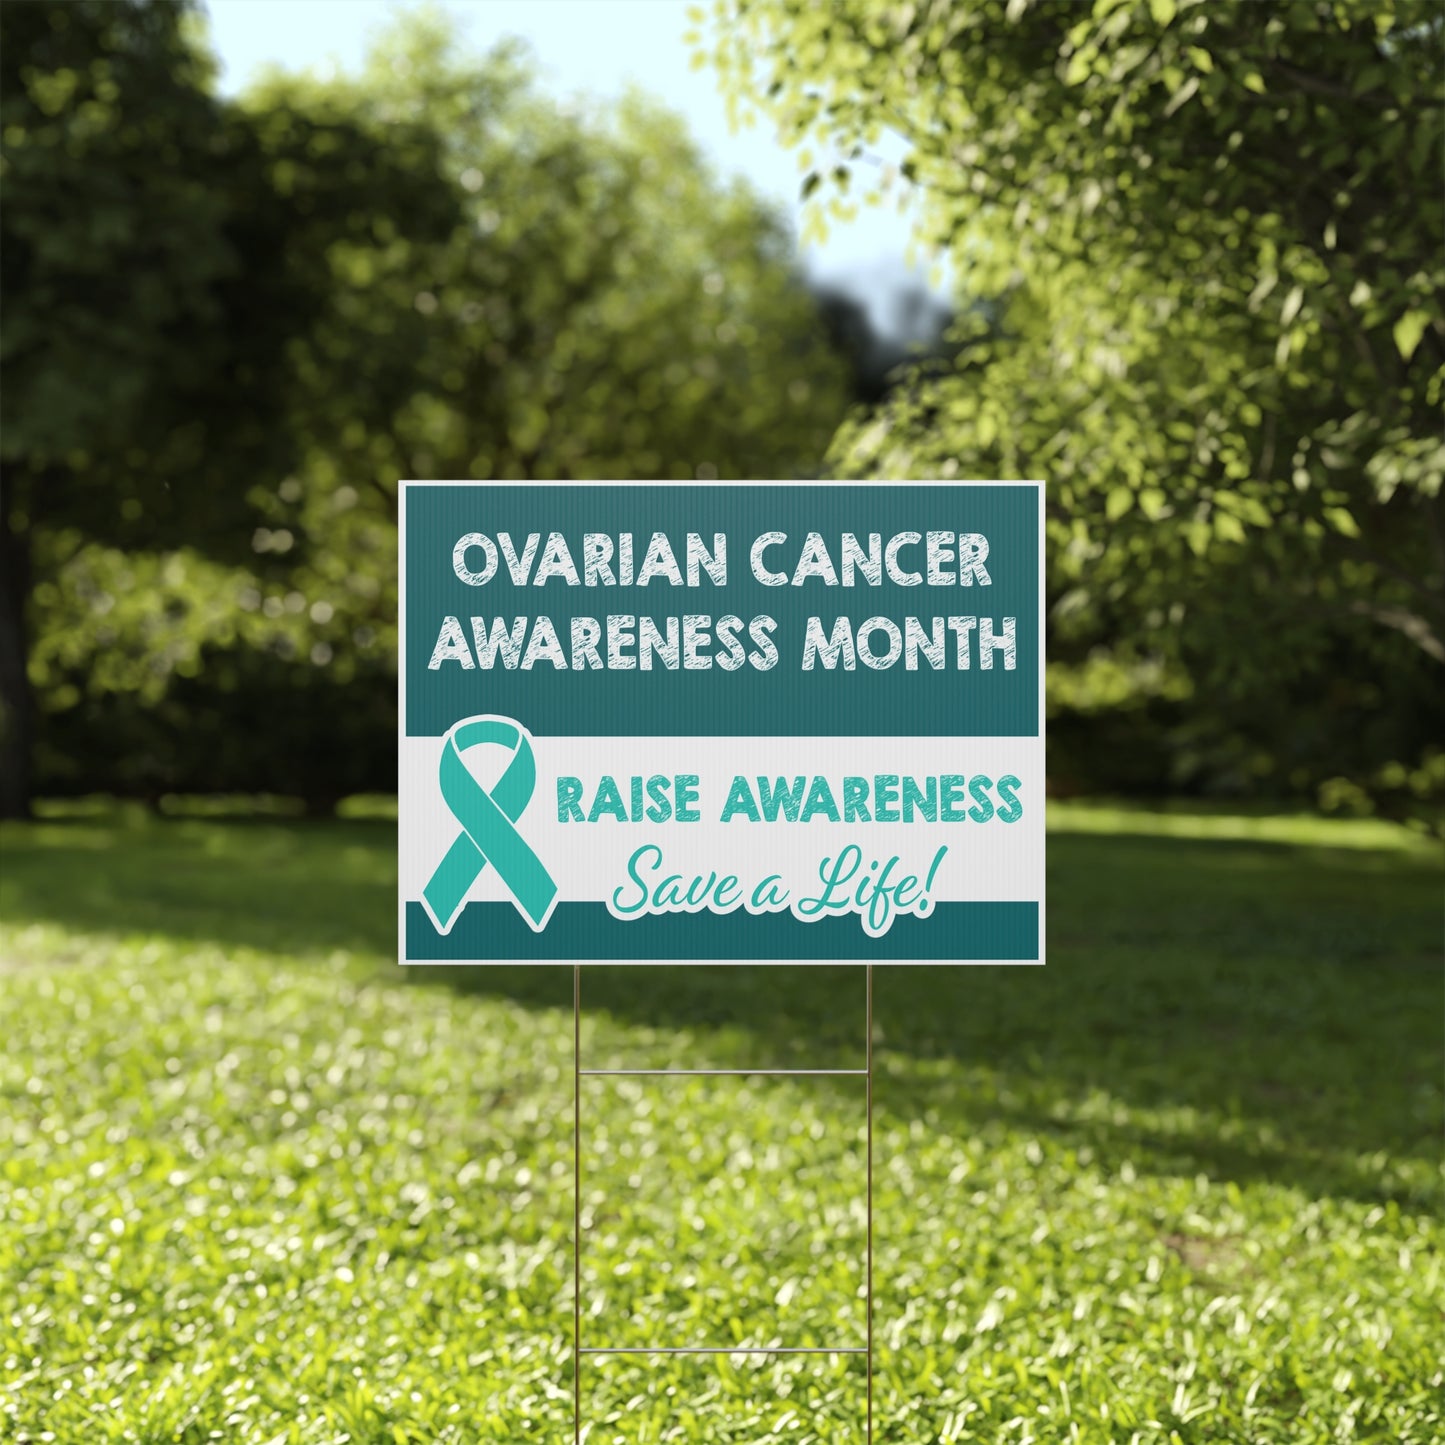 Ovarian Cancer Awareness Yard Sign, 18x12, 24x18, 36x24, H-Stake Included, v3